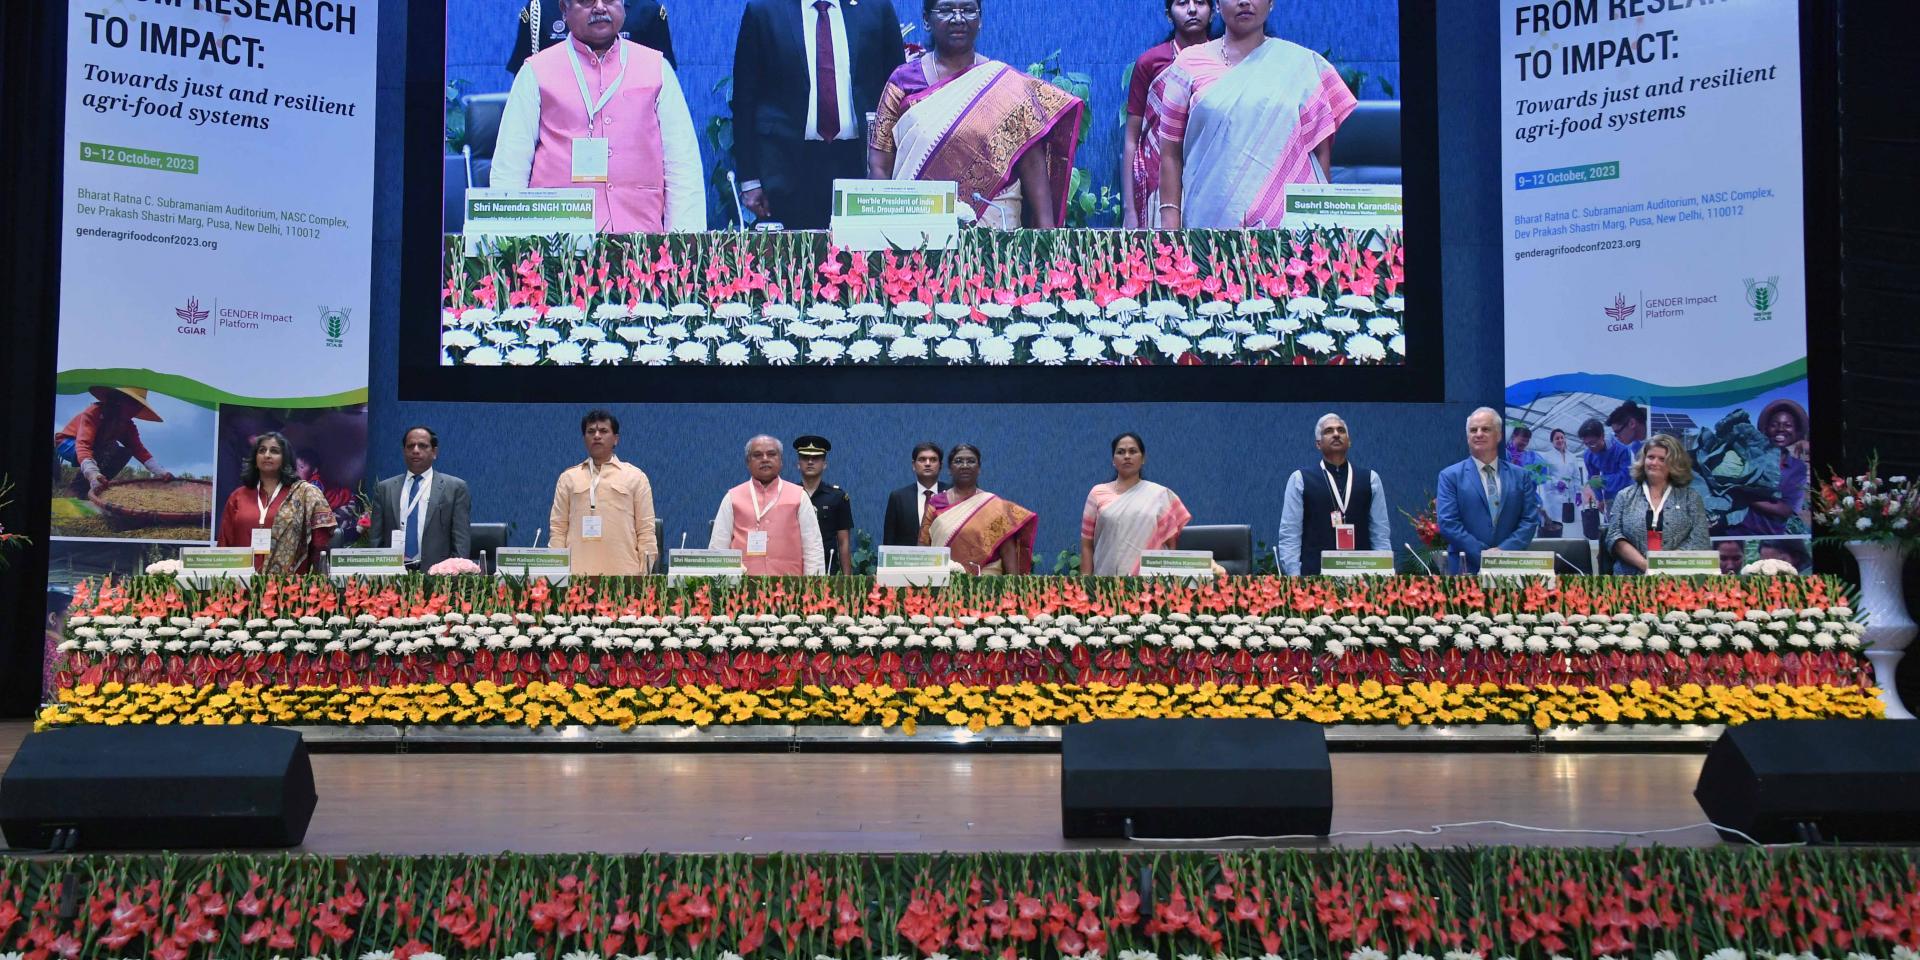 President inaugurates an International Conference on Agri-food systems 